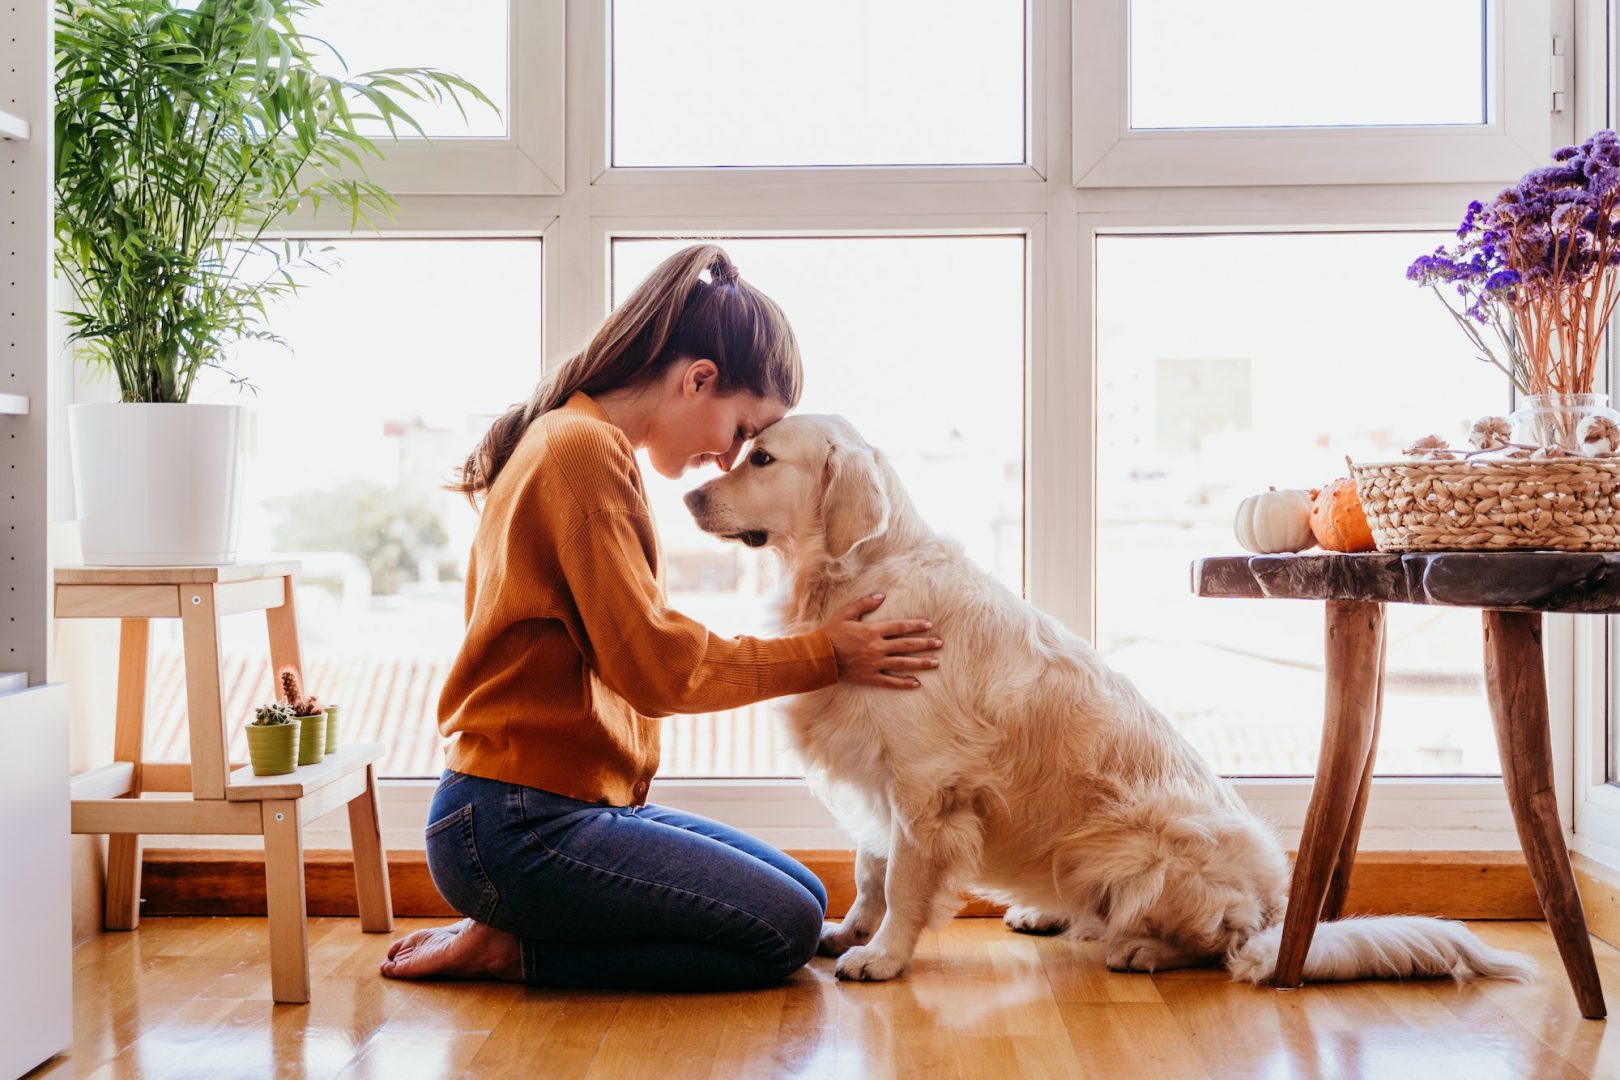 beautiful woman hugging adorable golden retriever dog at home. love for animals concept. lifestyle